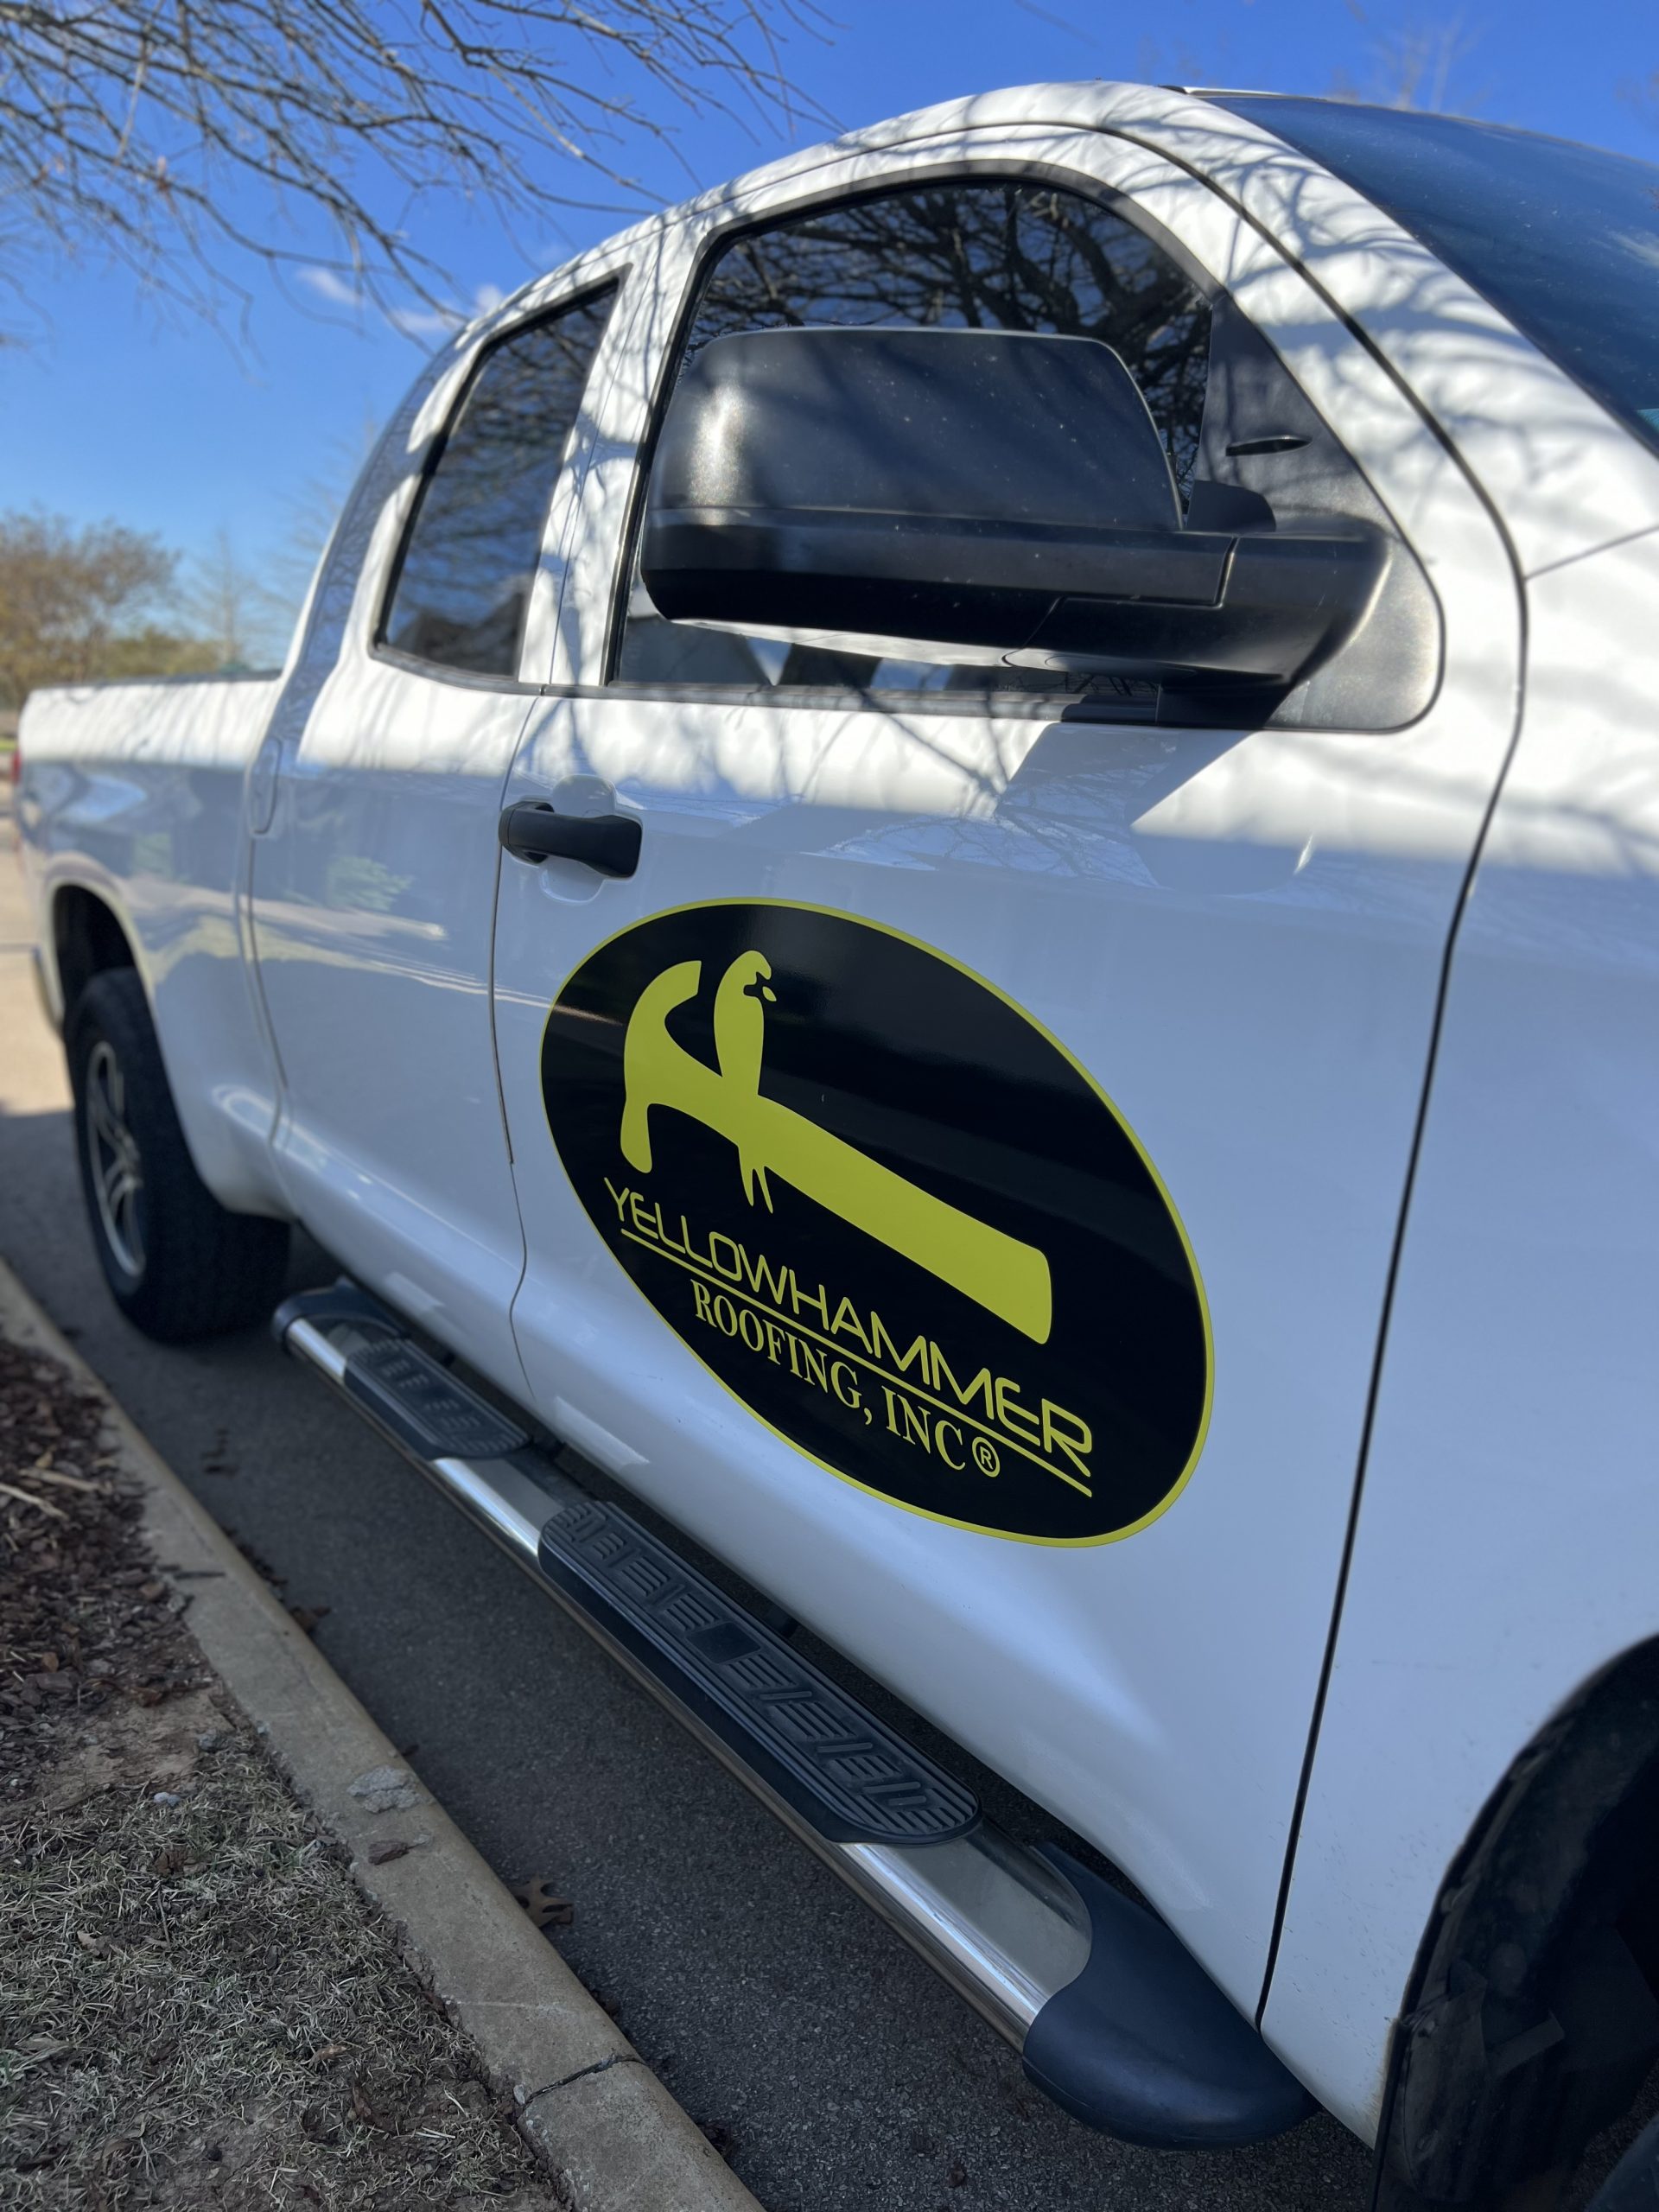 All Things Madison | Your Roofing Guy in Madison: Daniel Canada with Yellowhammer Roofing